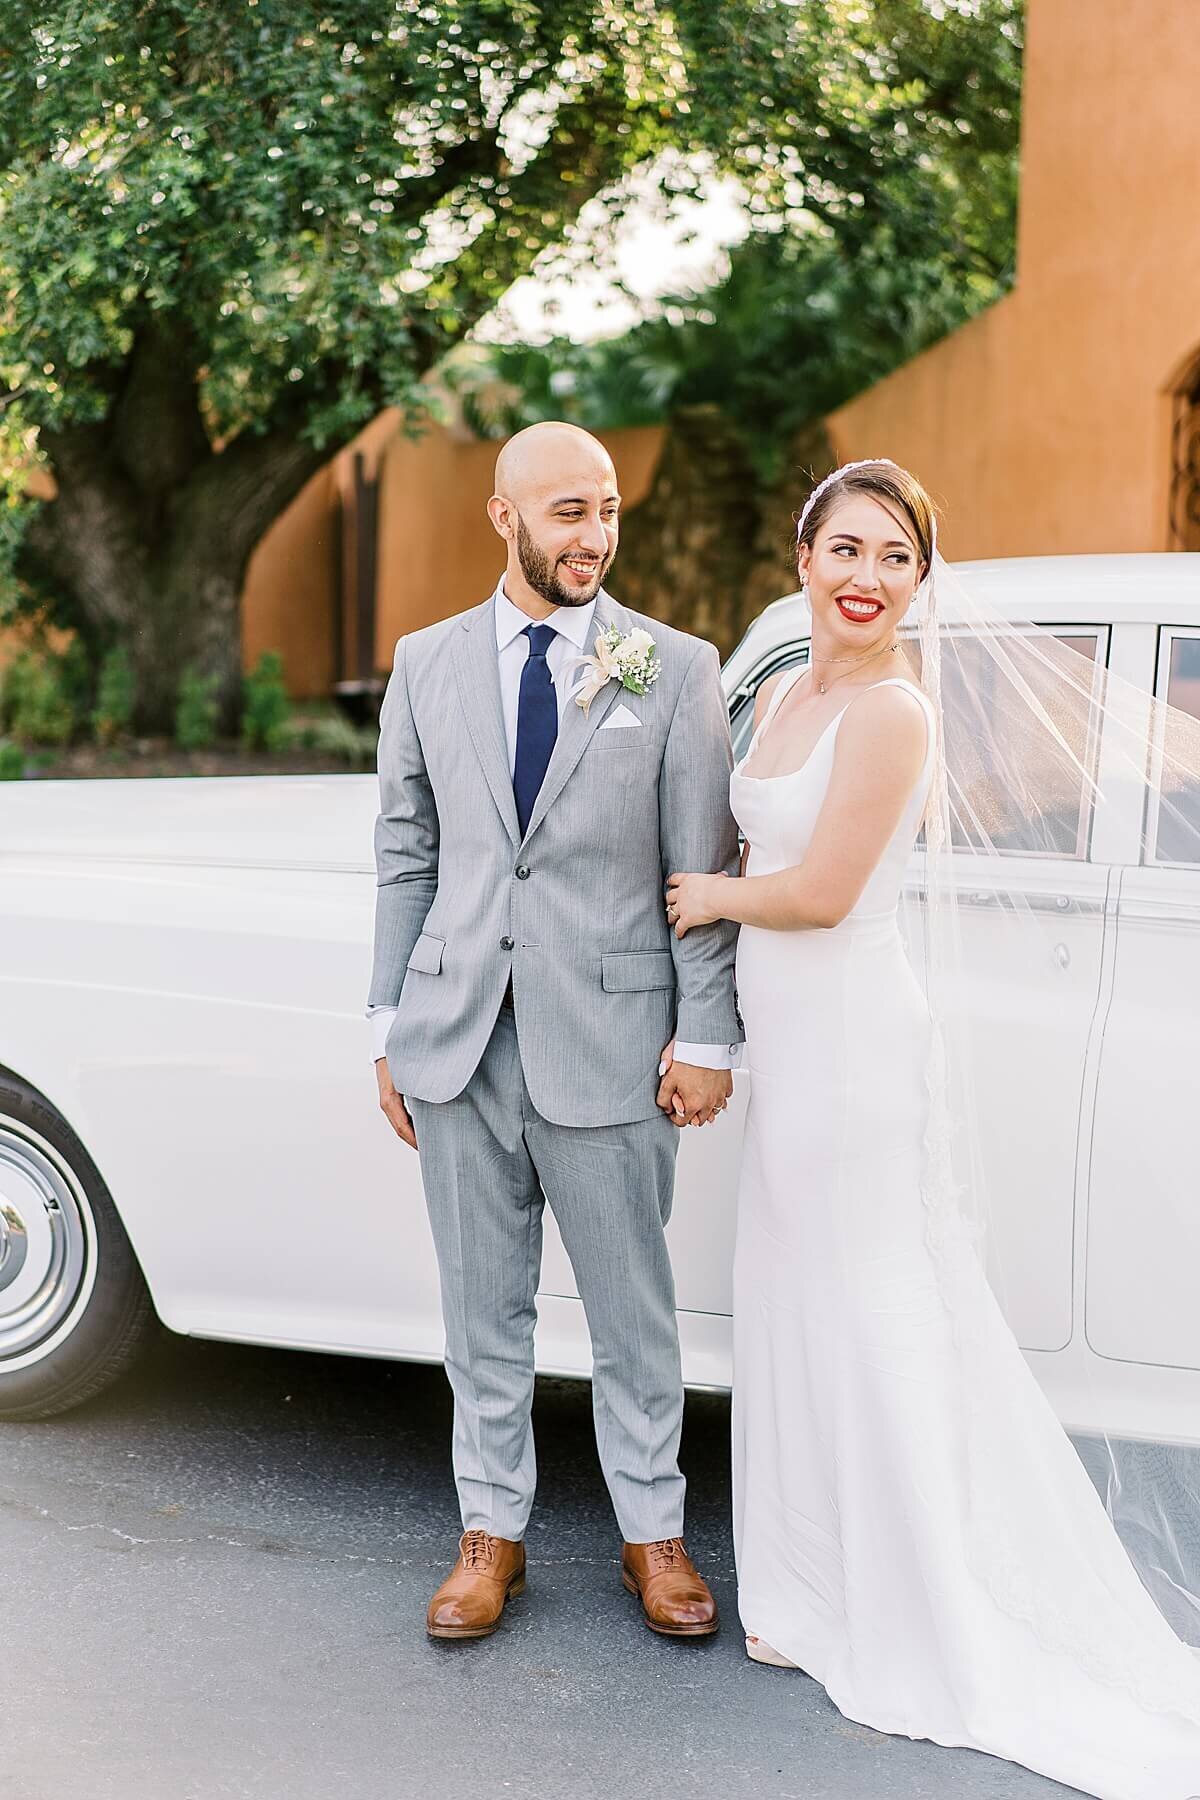 Bride and Groom Portraits at Agave Estates in Katy, Texas photographed by Alicia Yarrish Photography